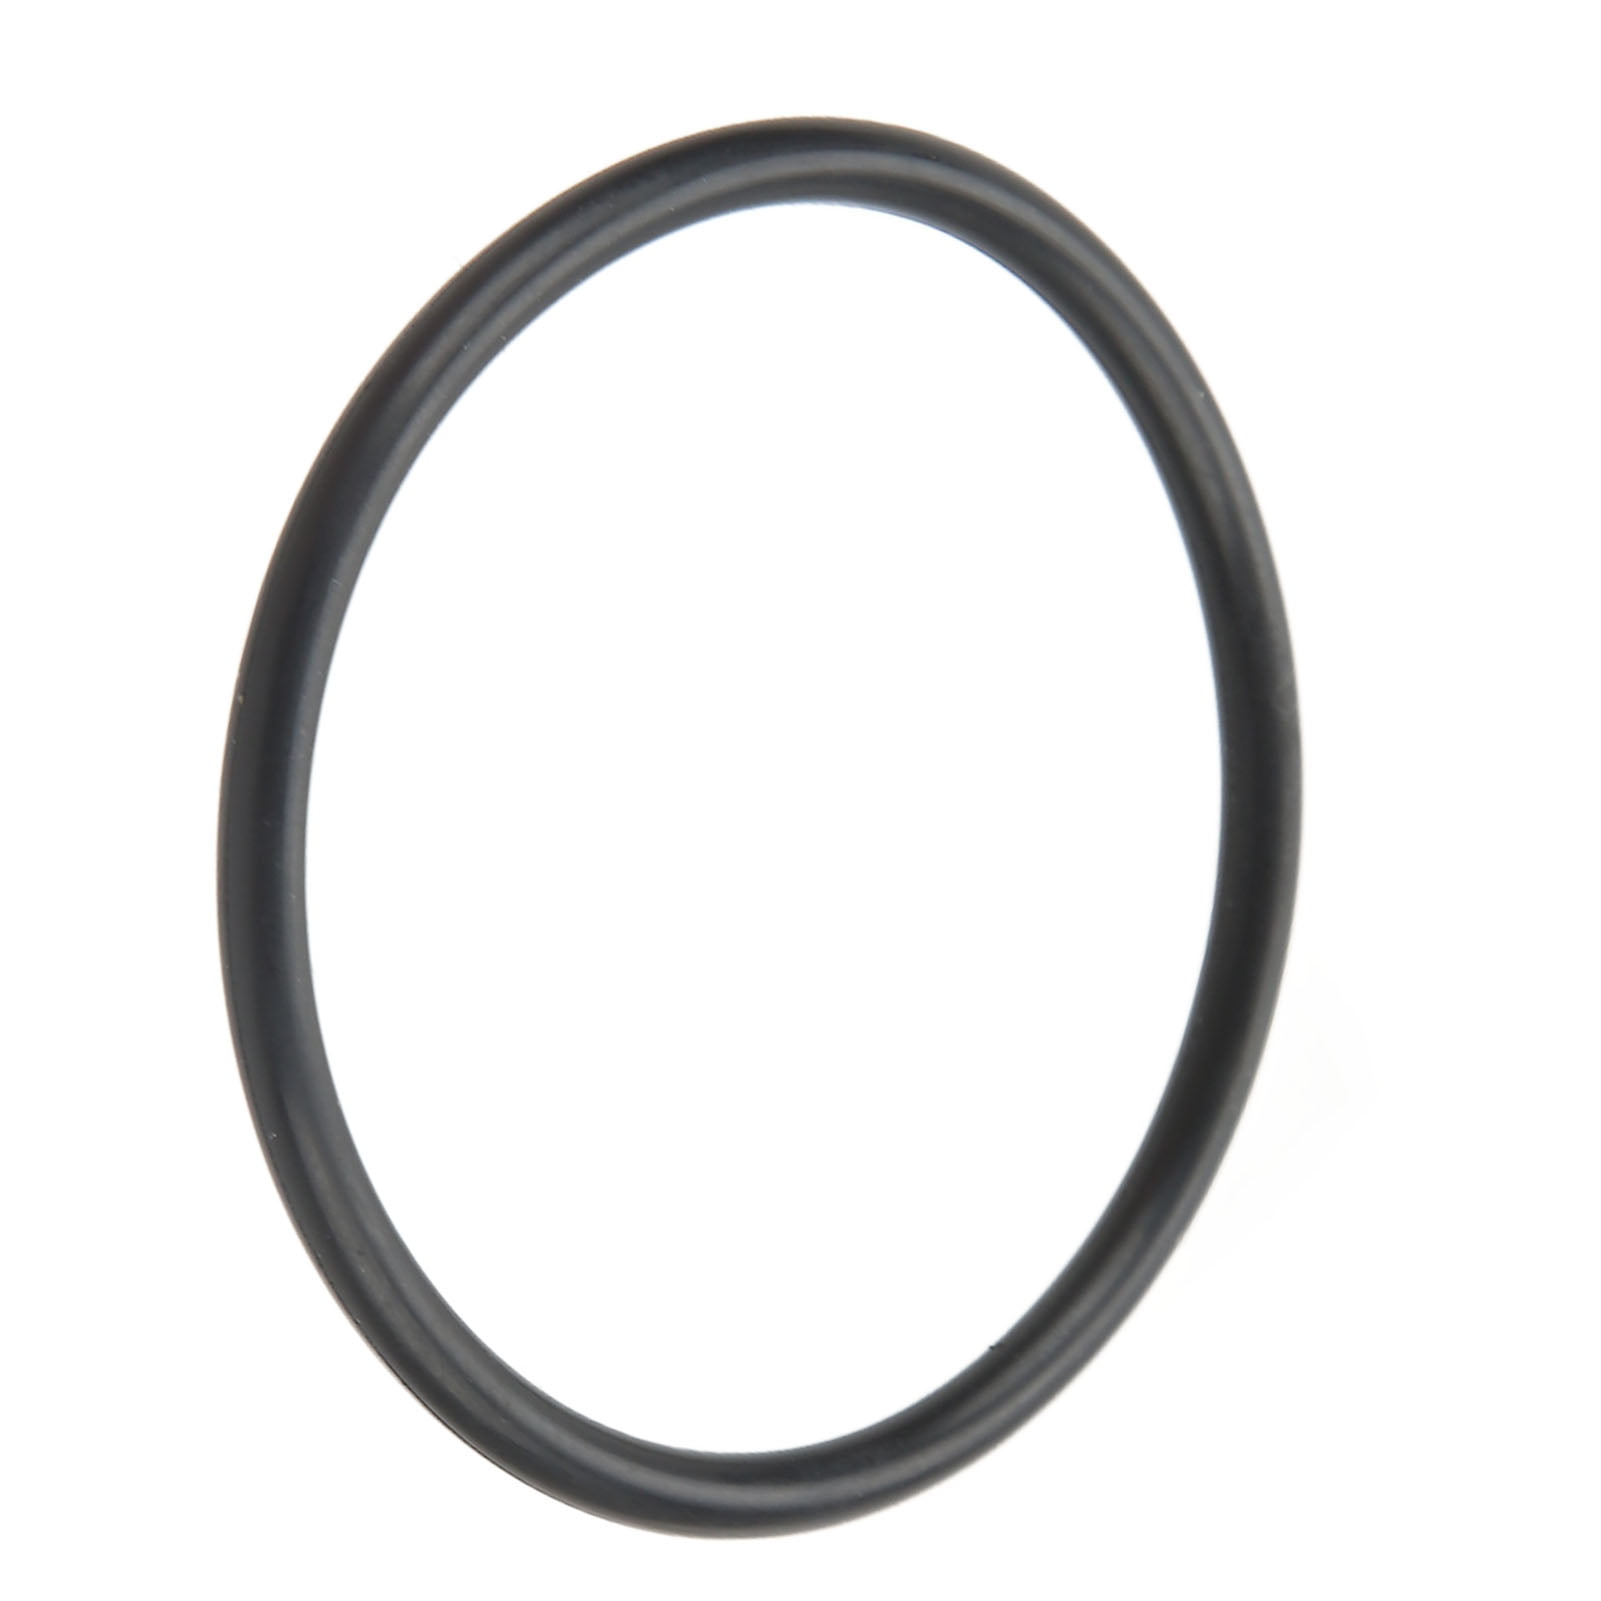 Water O Rings, Outboard O Rings Strong Practicality Small Light Easy To ...